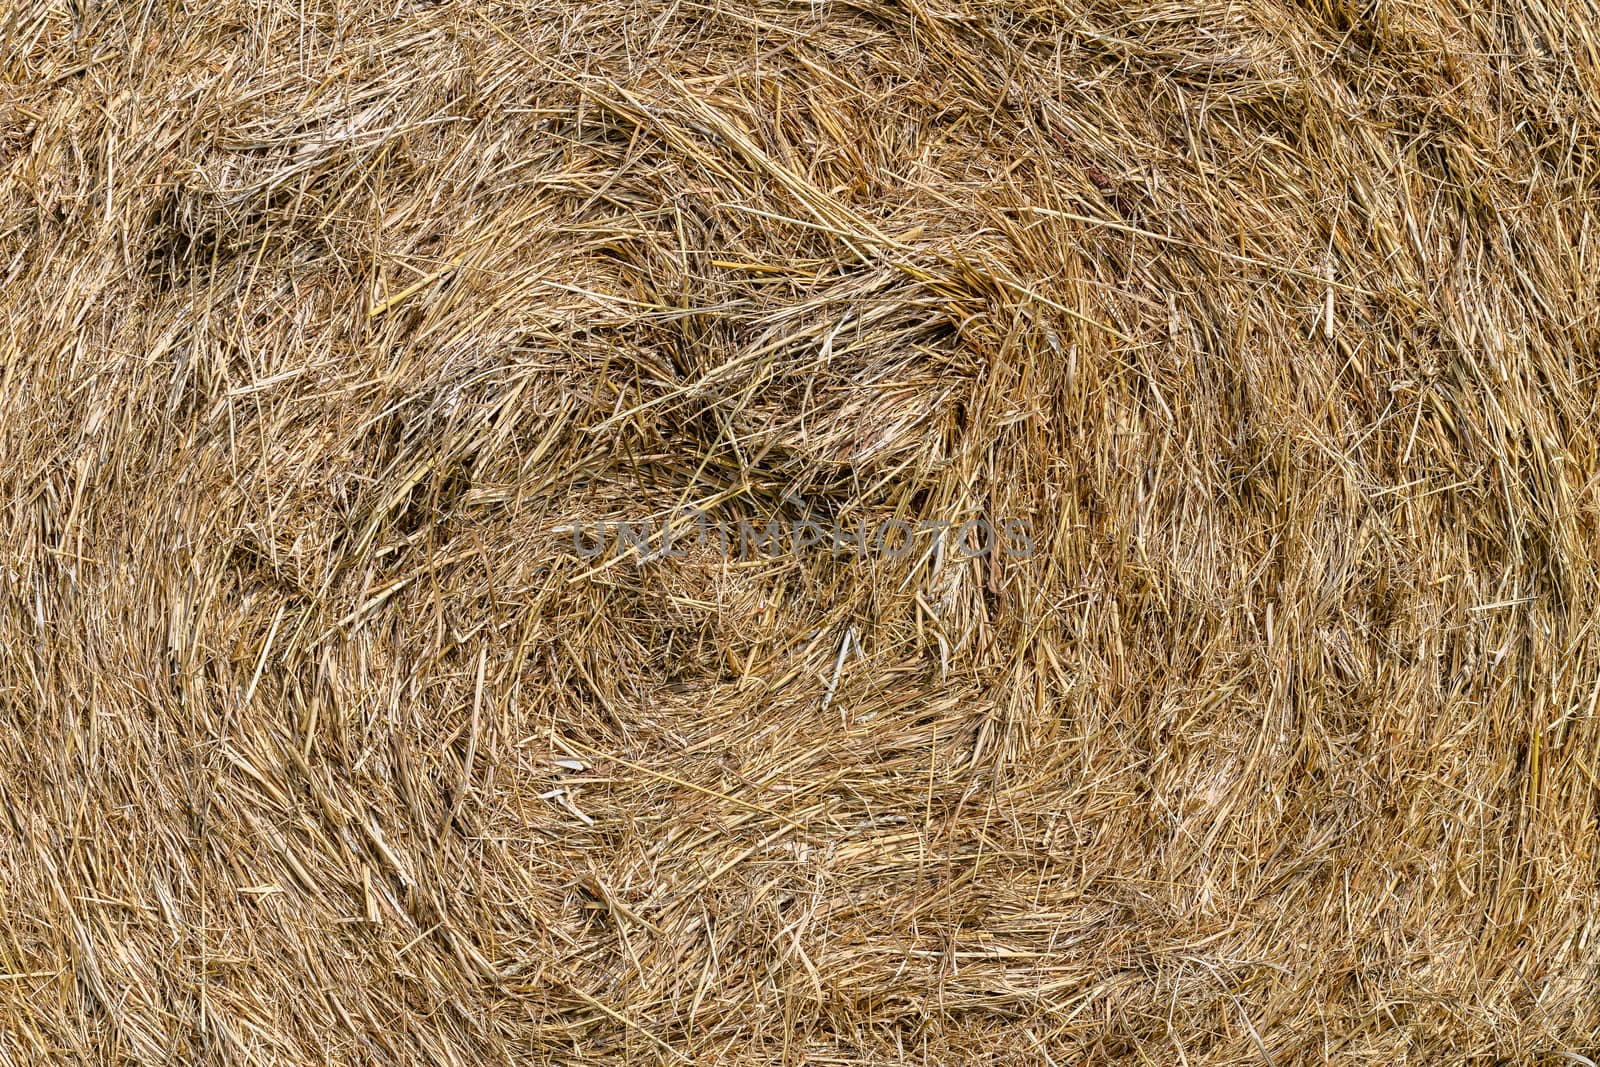 Close up of a hay bale